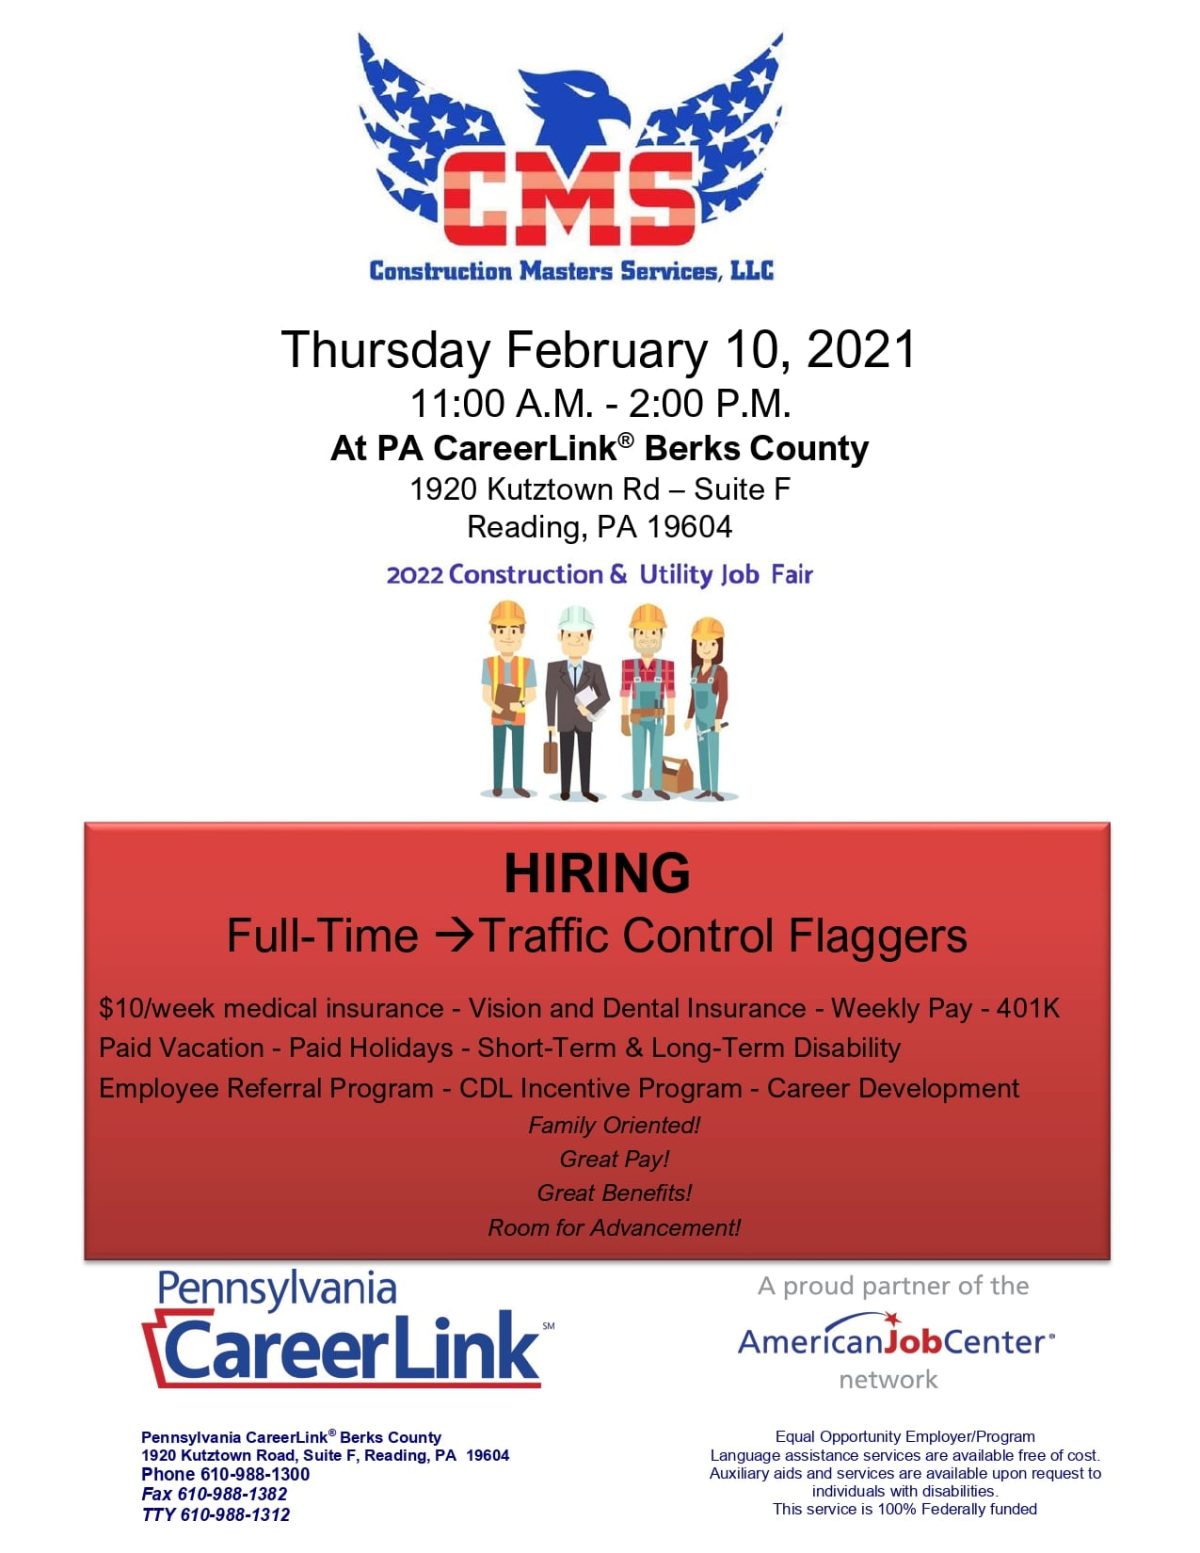 Looking to start an exciting and rewarding career? Come see us at the upcoming job fair!